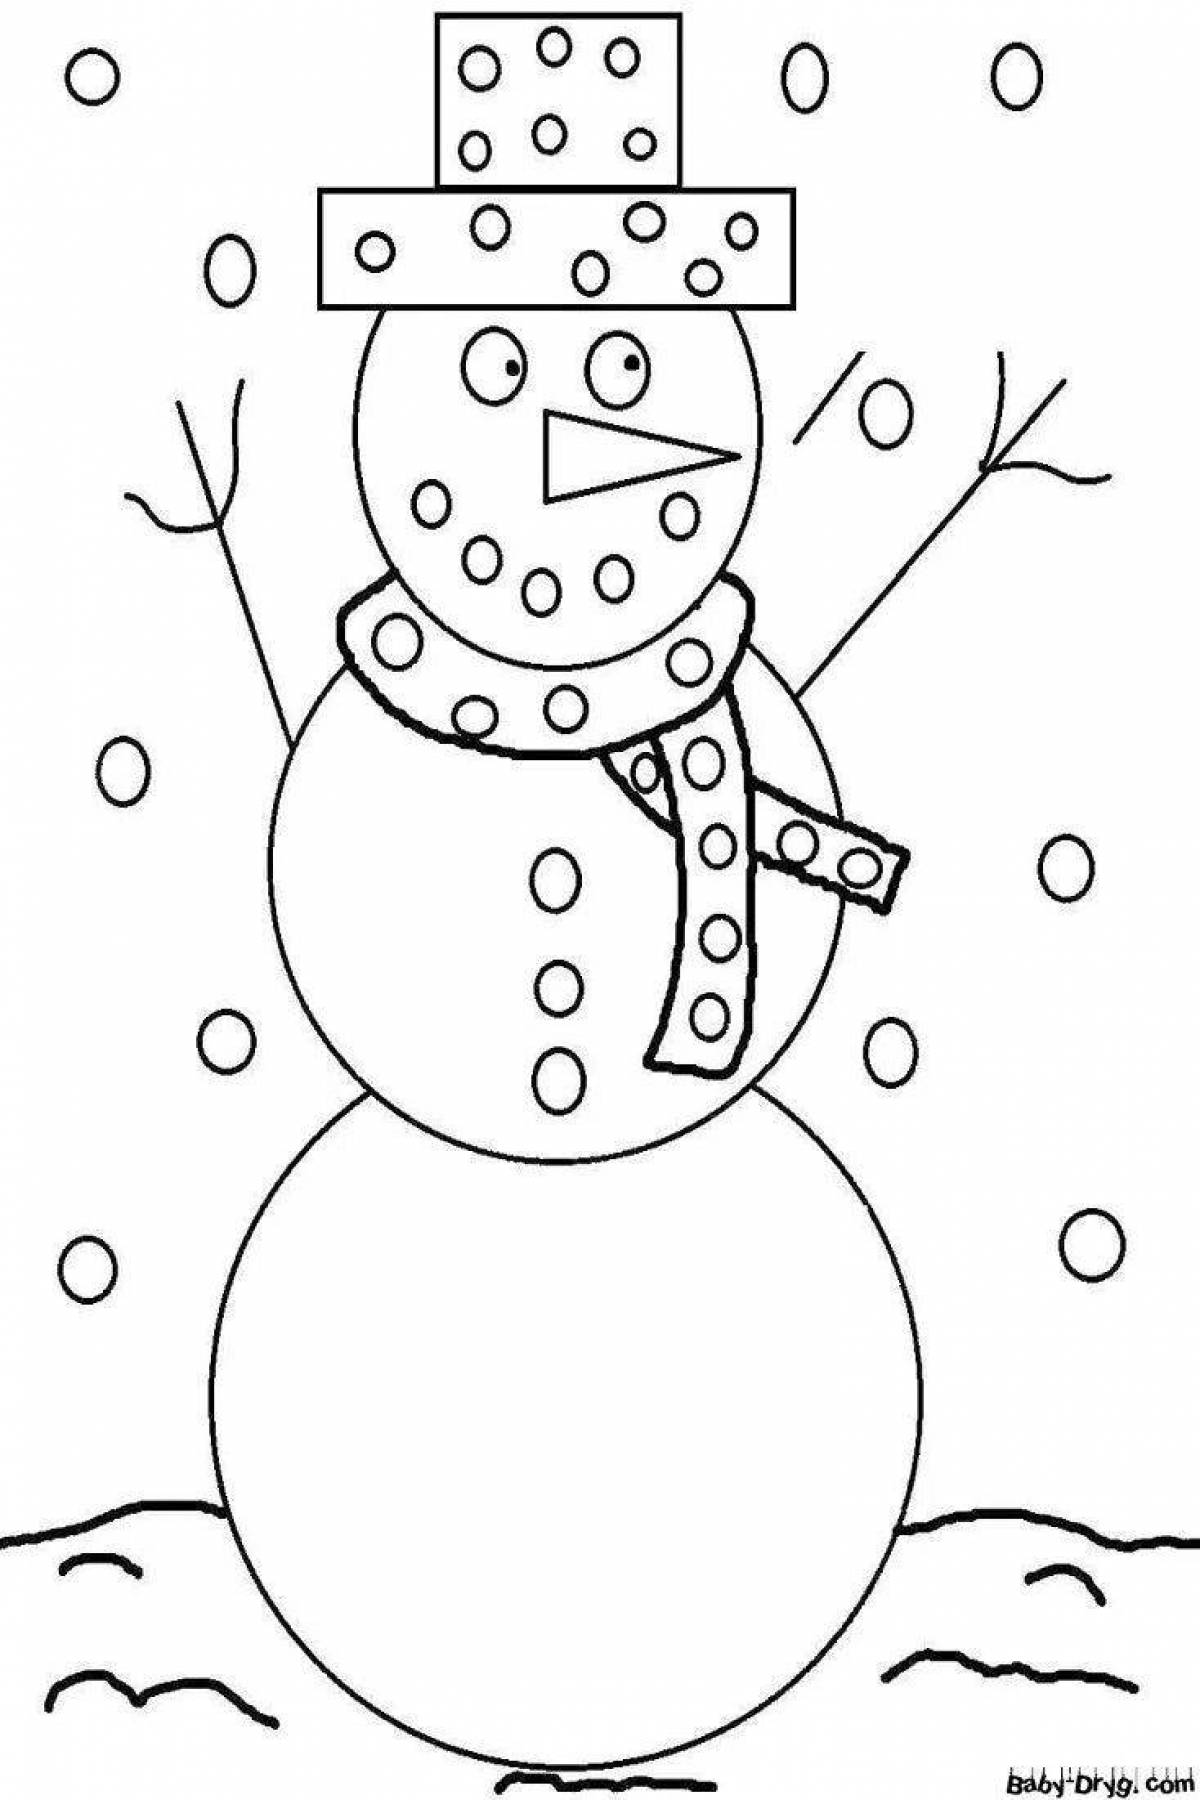 Cheerful children's coloring snowman